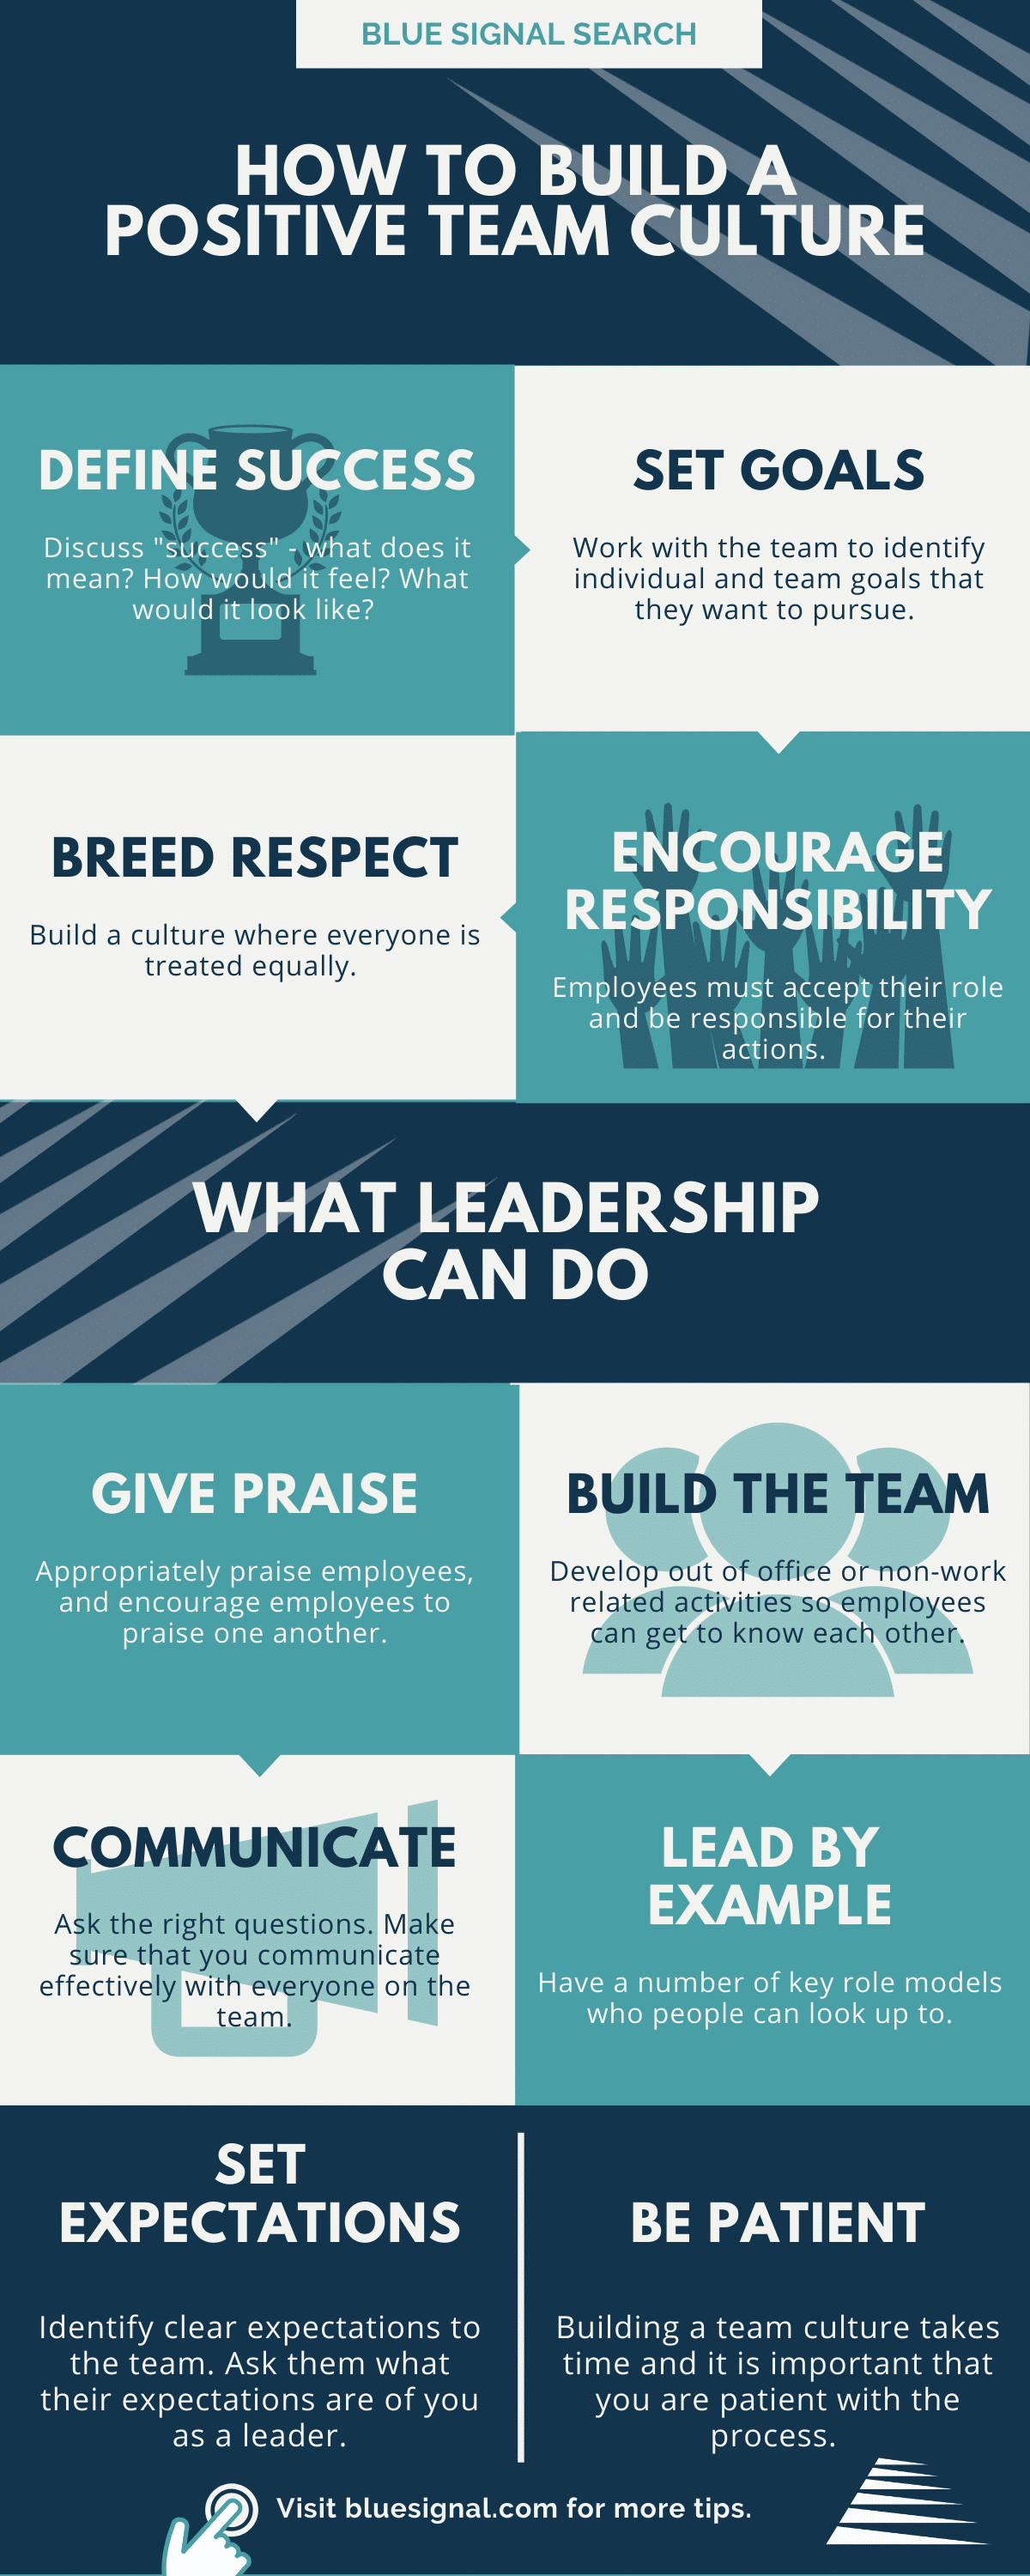 How to Build a Positive Team Culture - Infographic